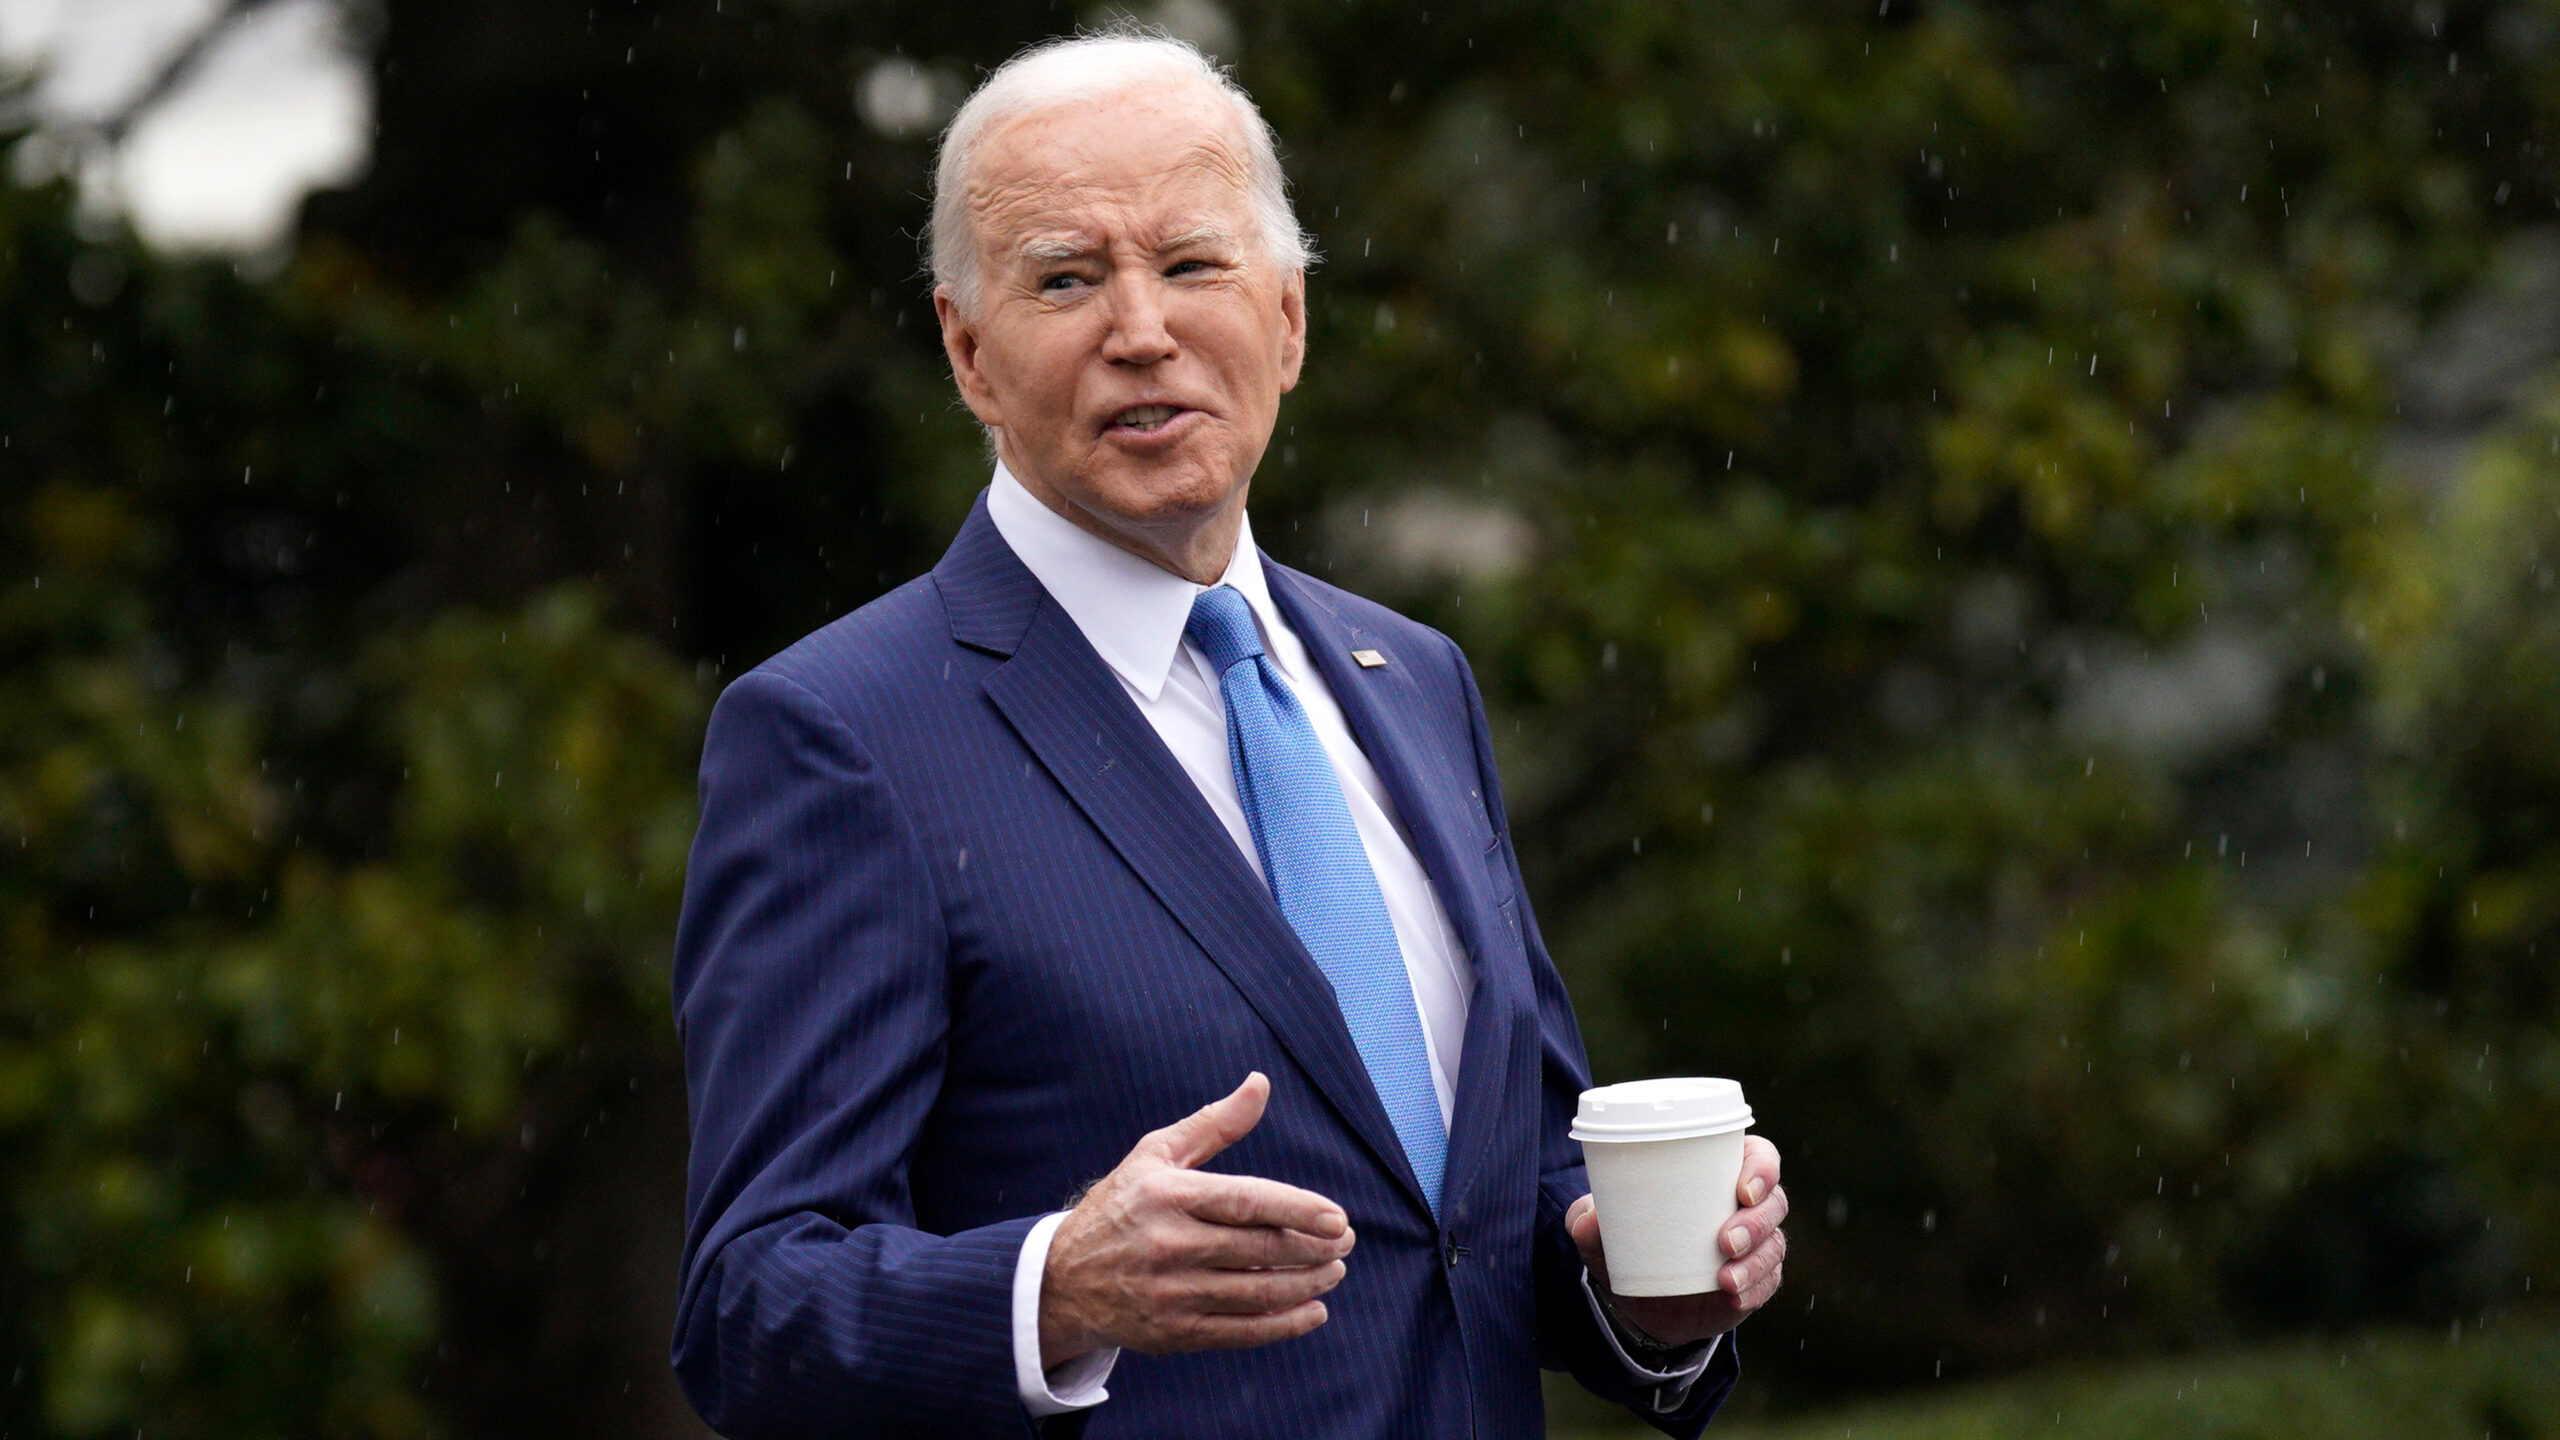 Second African Nation Pushes U.S. Out, Impacting Biden’s National Security